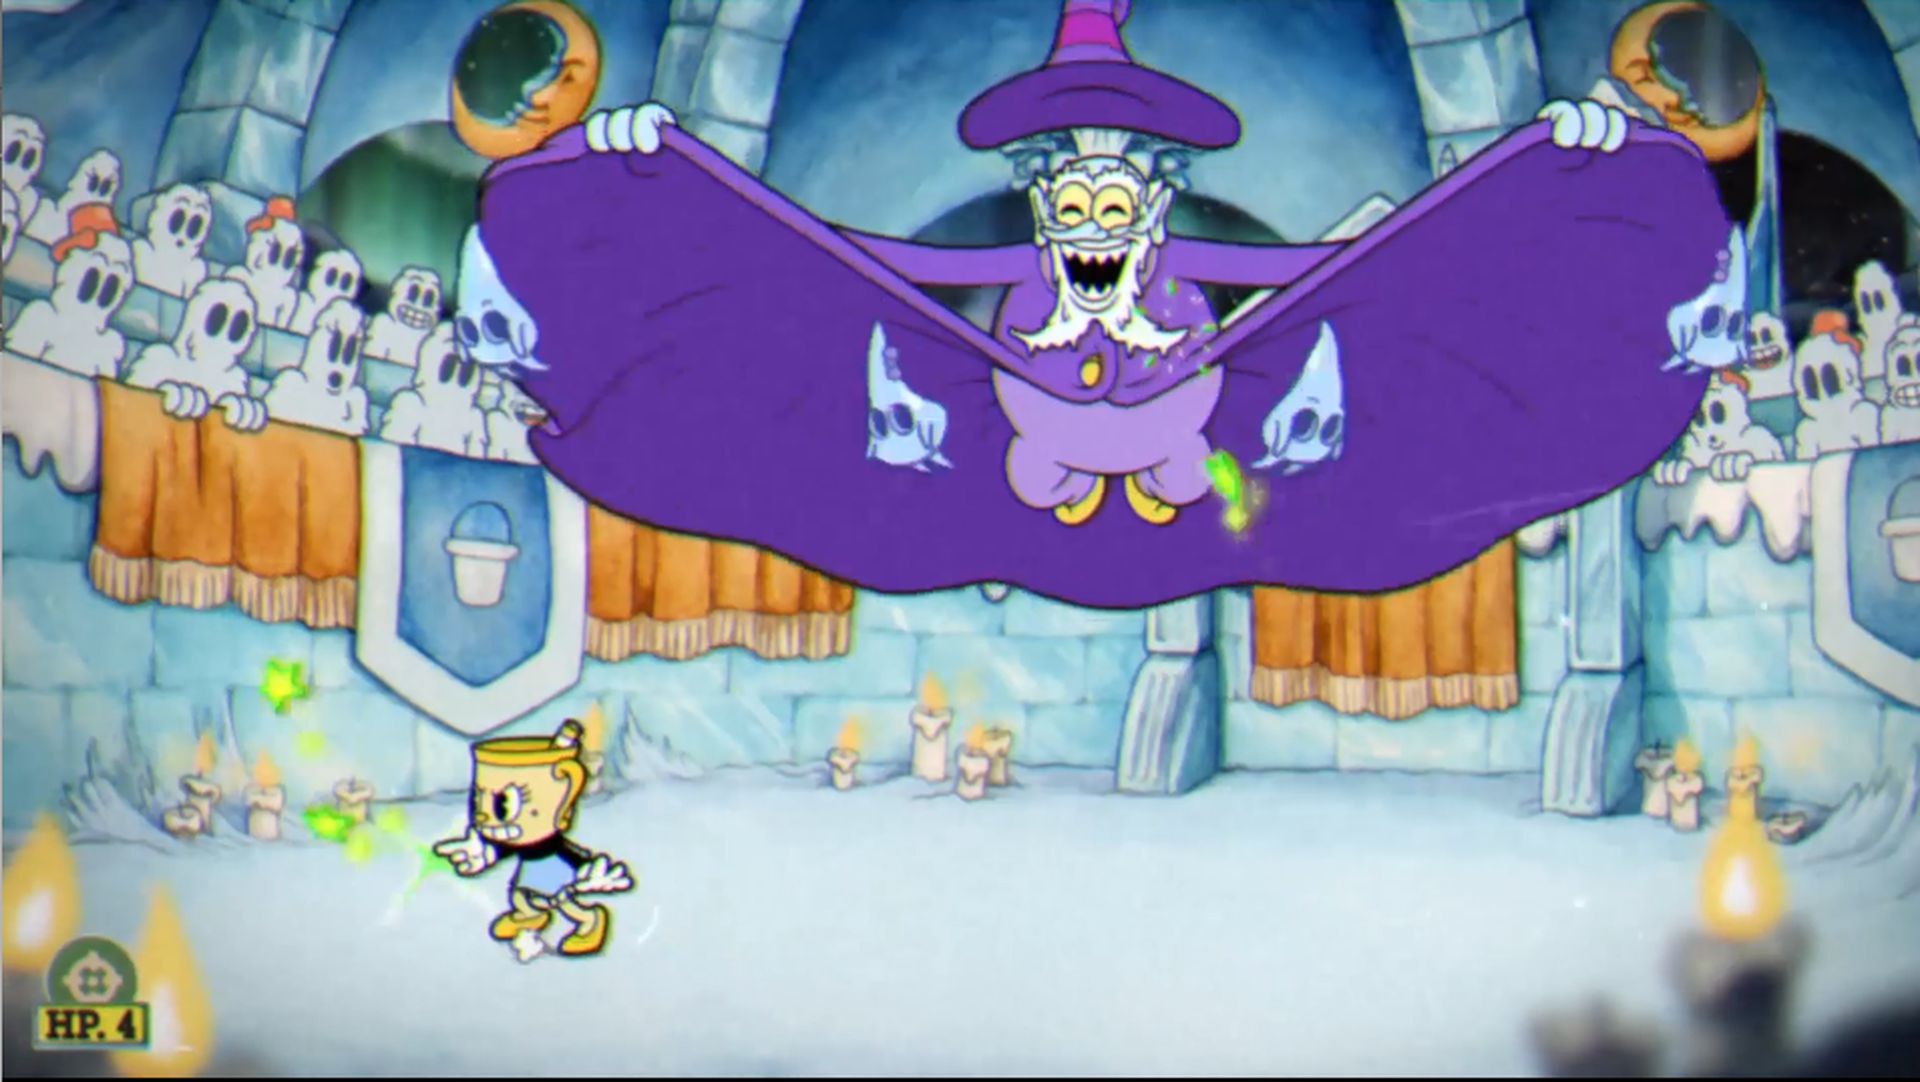 In order to finish the game, you better check out our Cuphead DLC all bosses list.